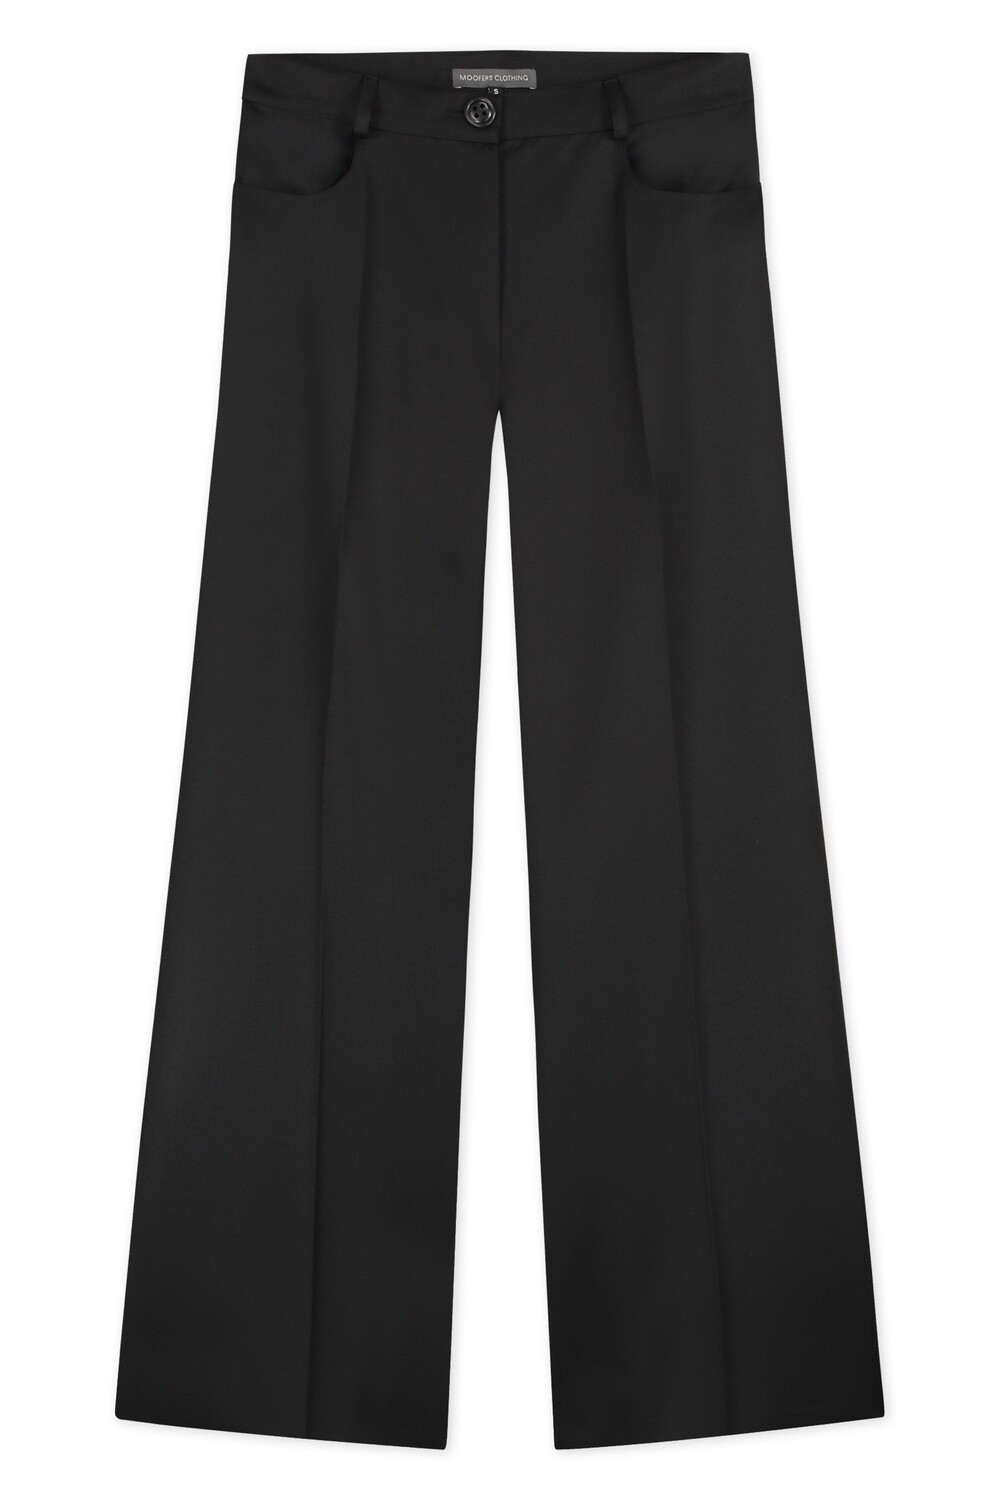 LOW WAISTED TROUSERS BLACK TWILL WOOL